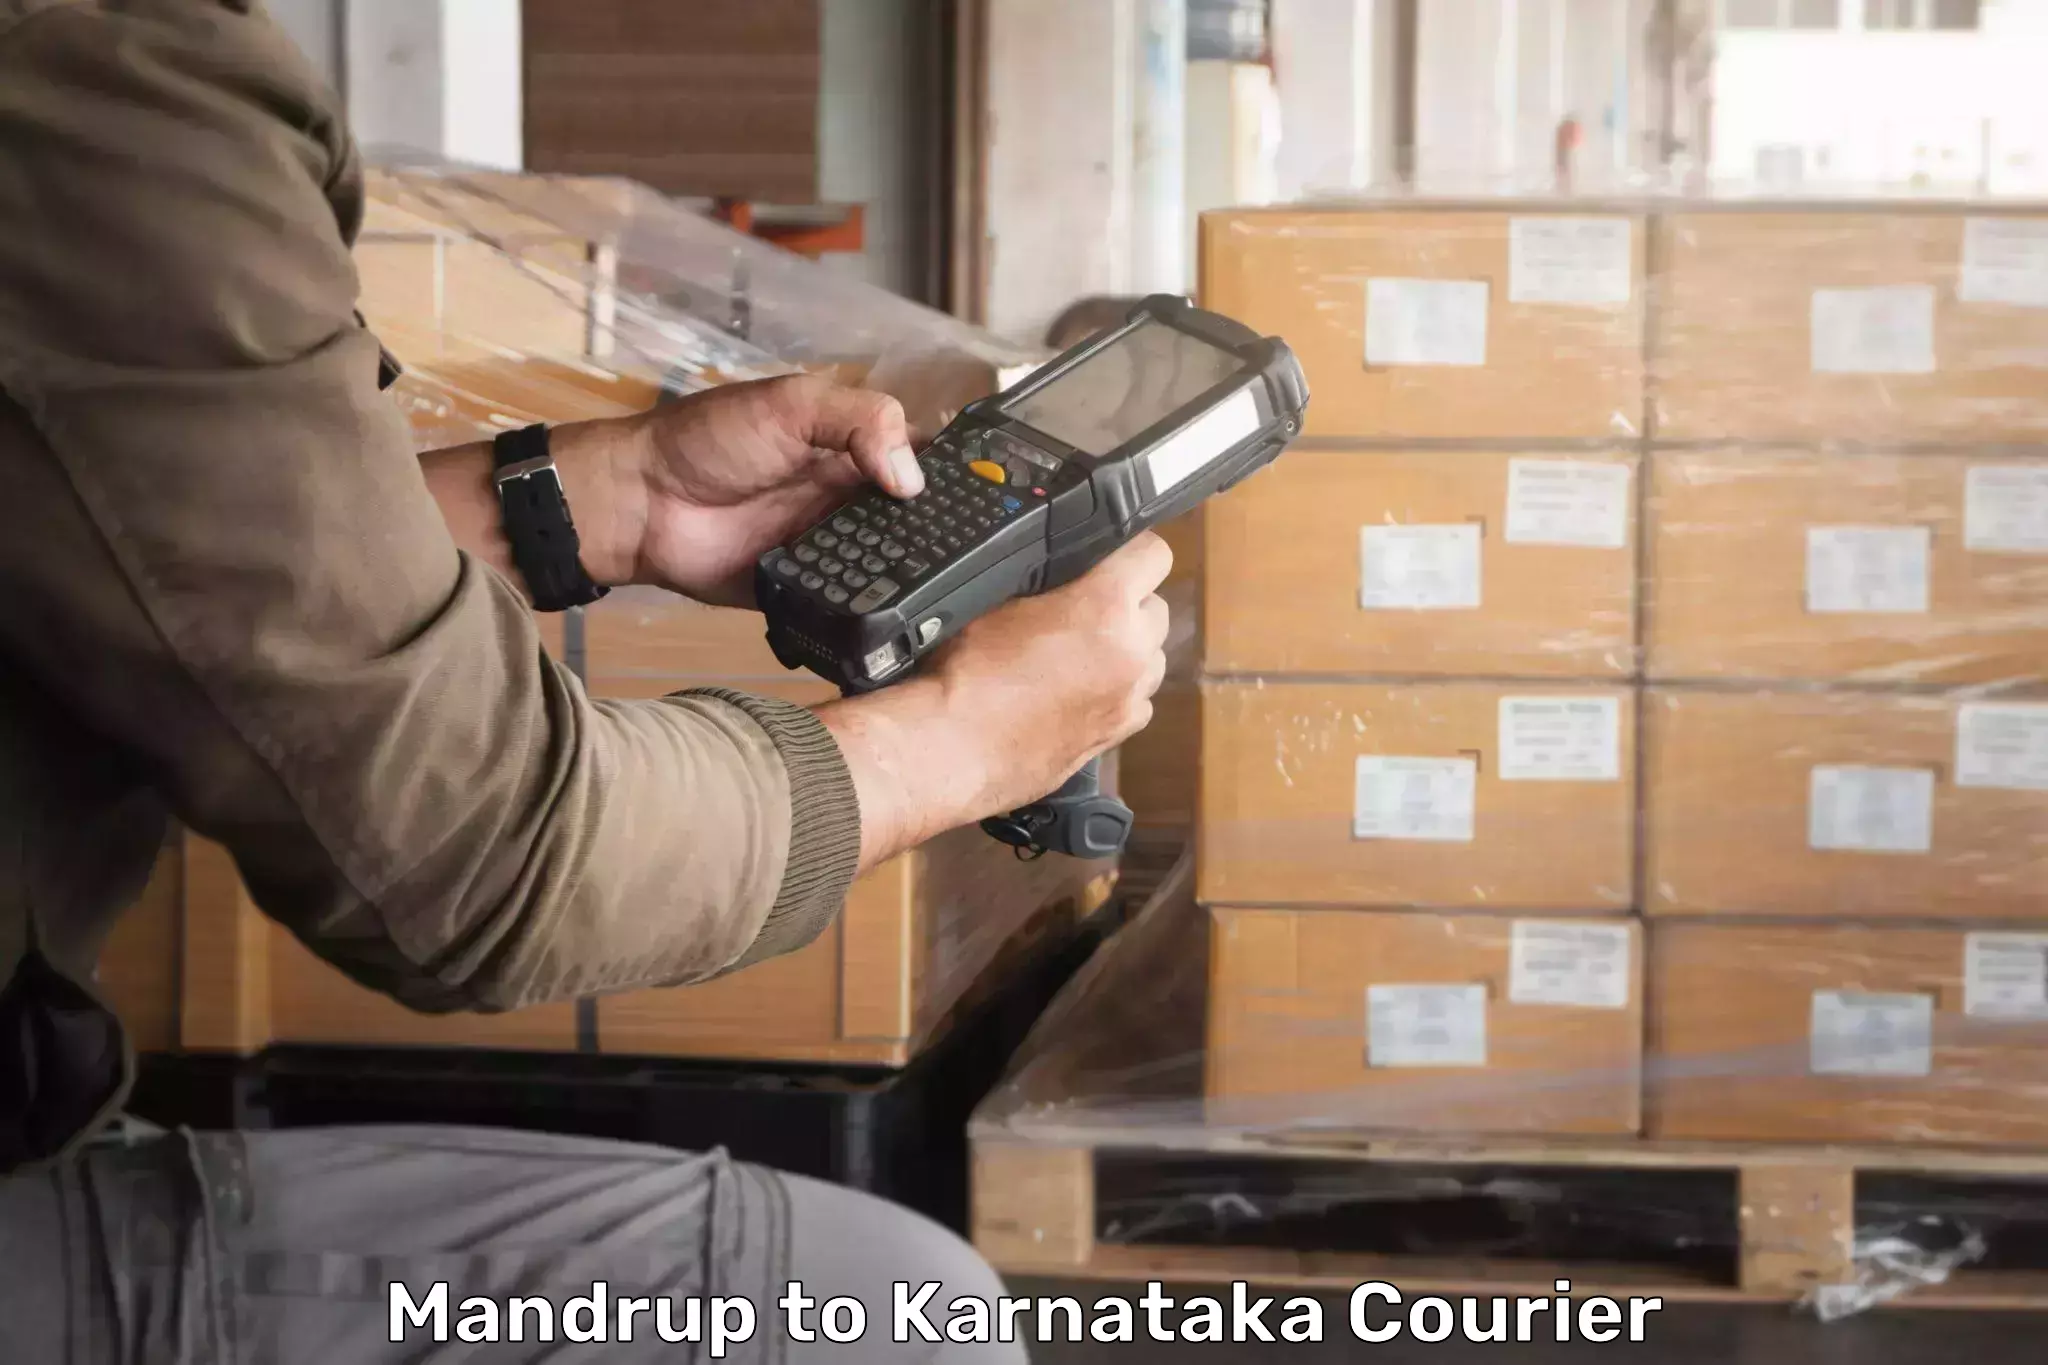 Track and trace shipping Mandrup to Manipal